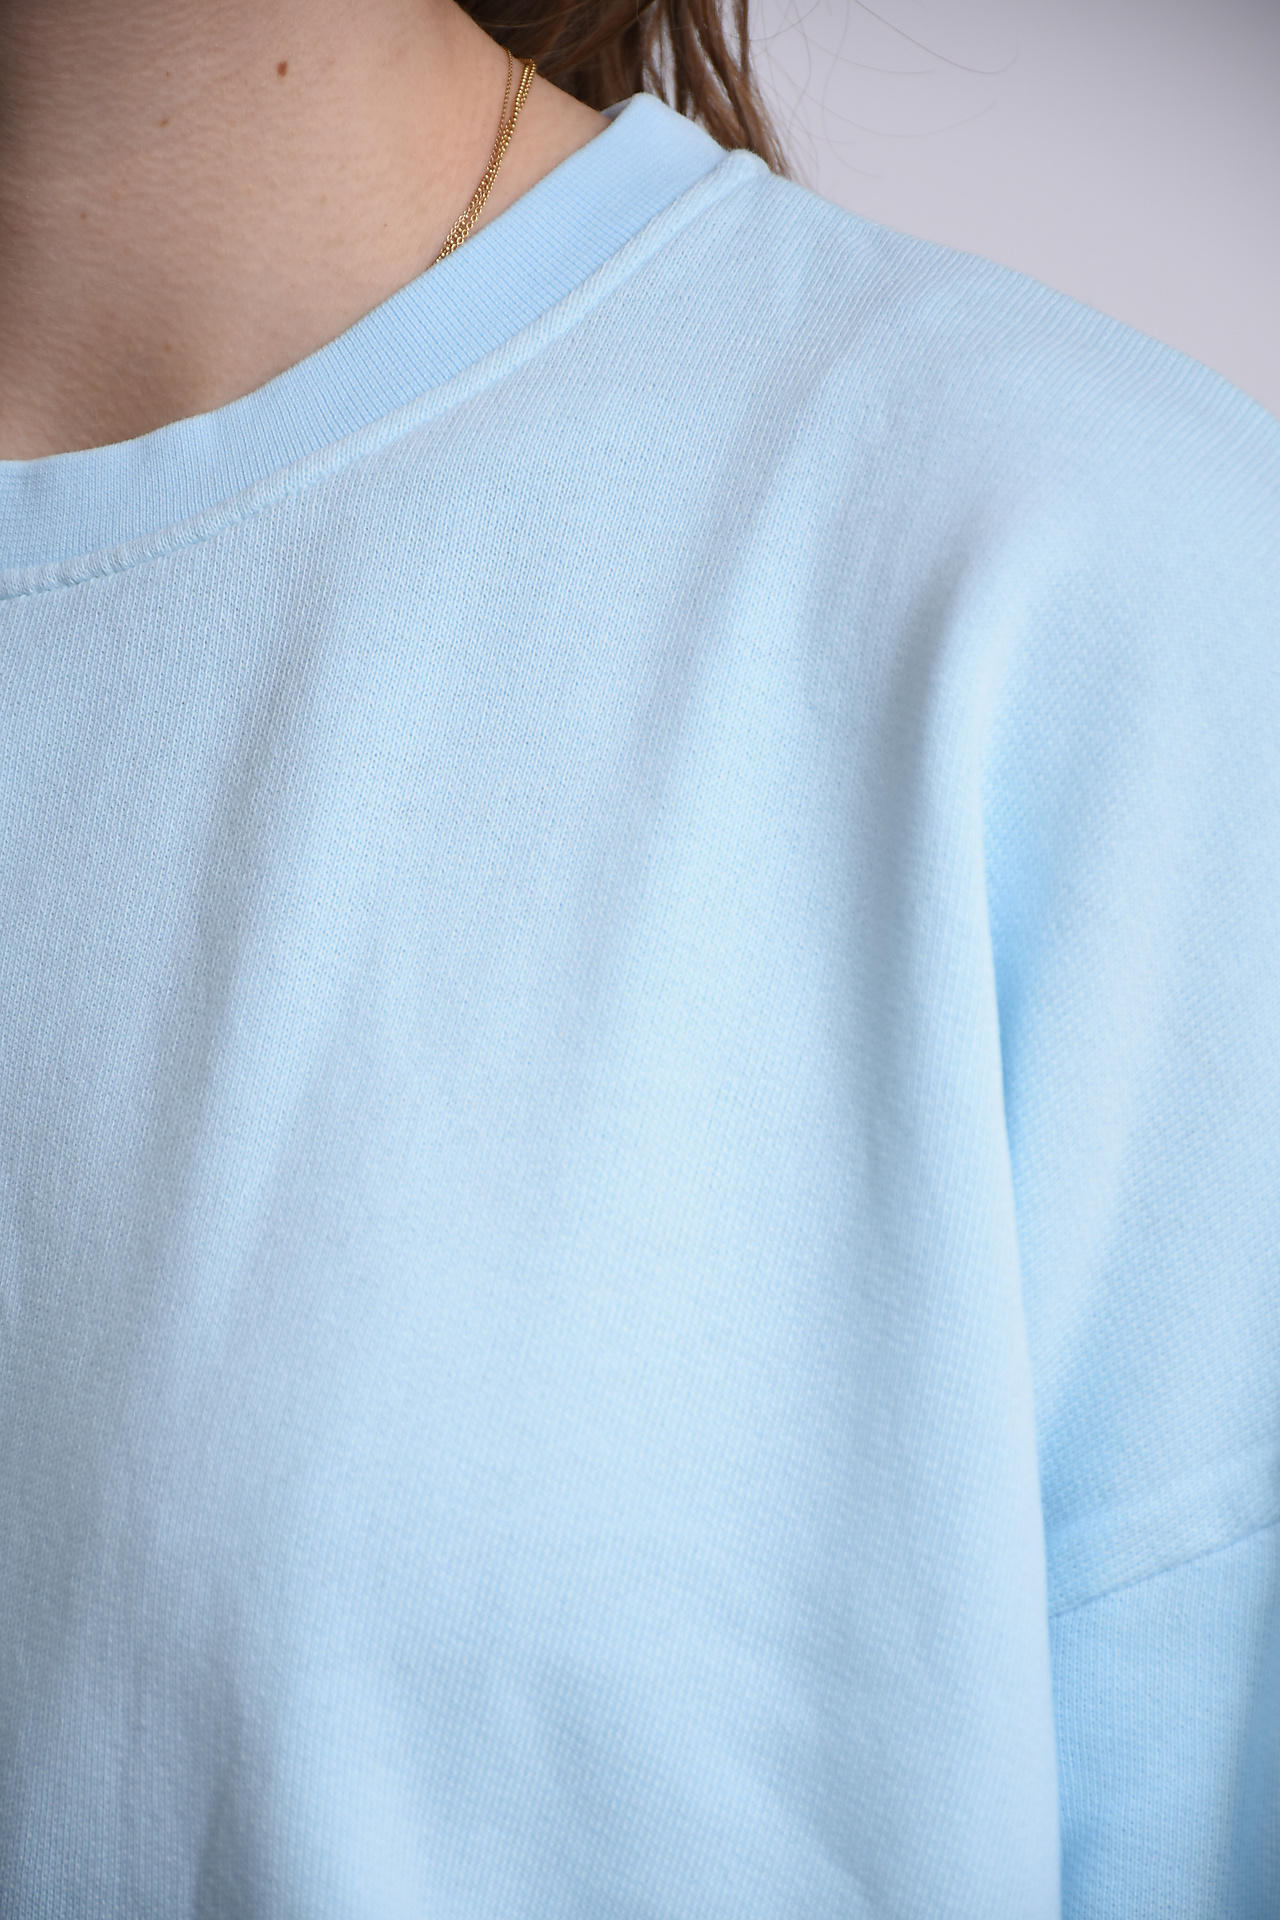 Just a Tee Sweaters Blue